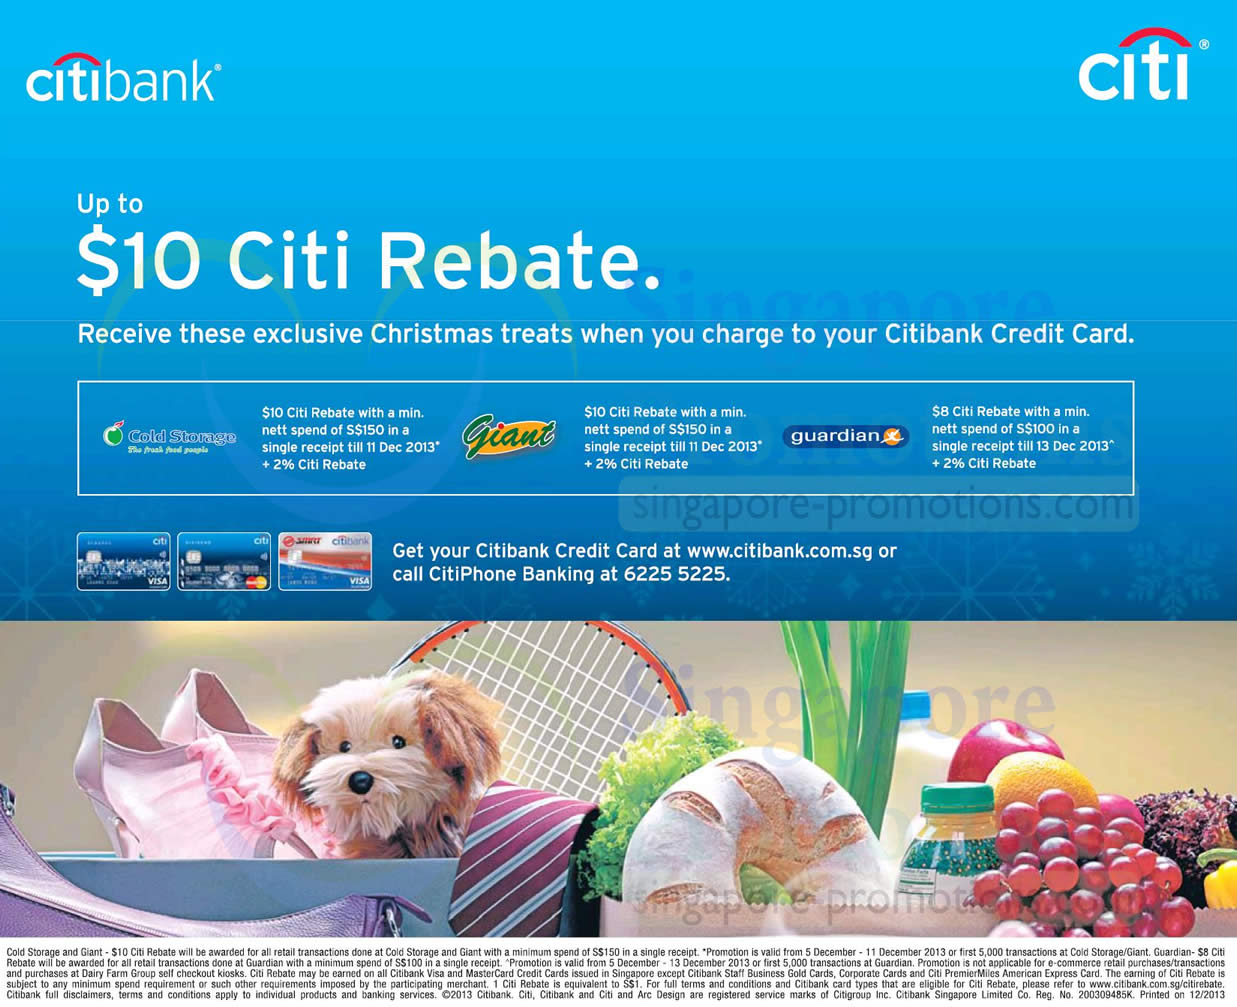 citibank-up-to-10-citi-rebate-cold-storage-giant-guardian-5-13